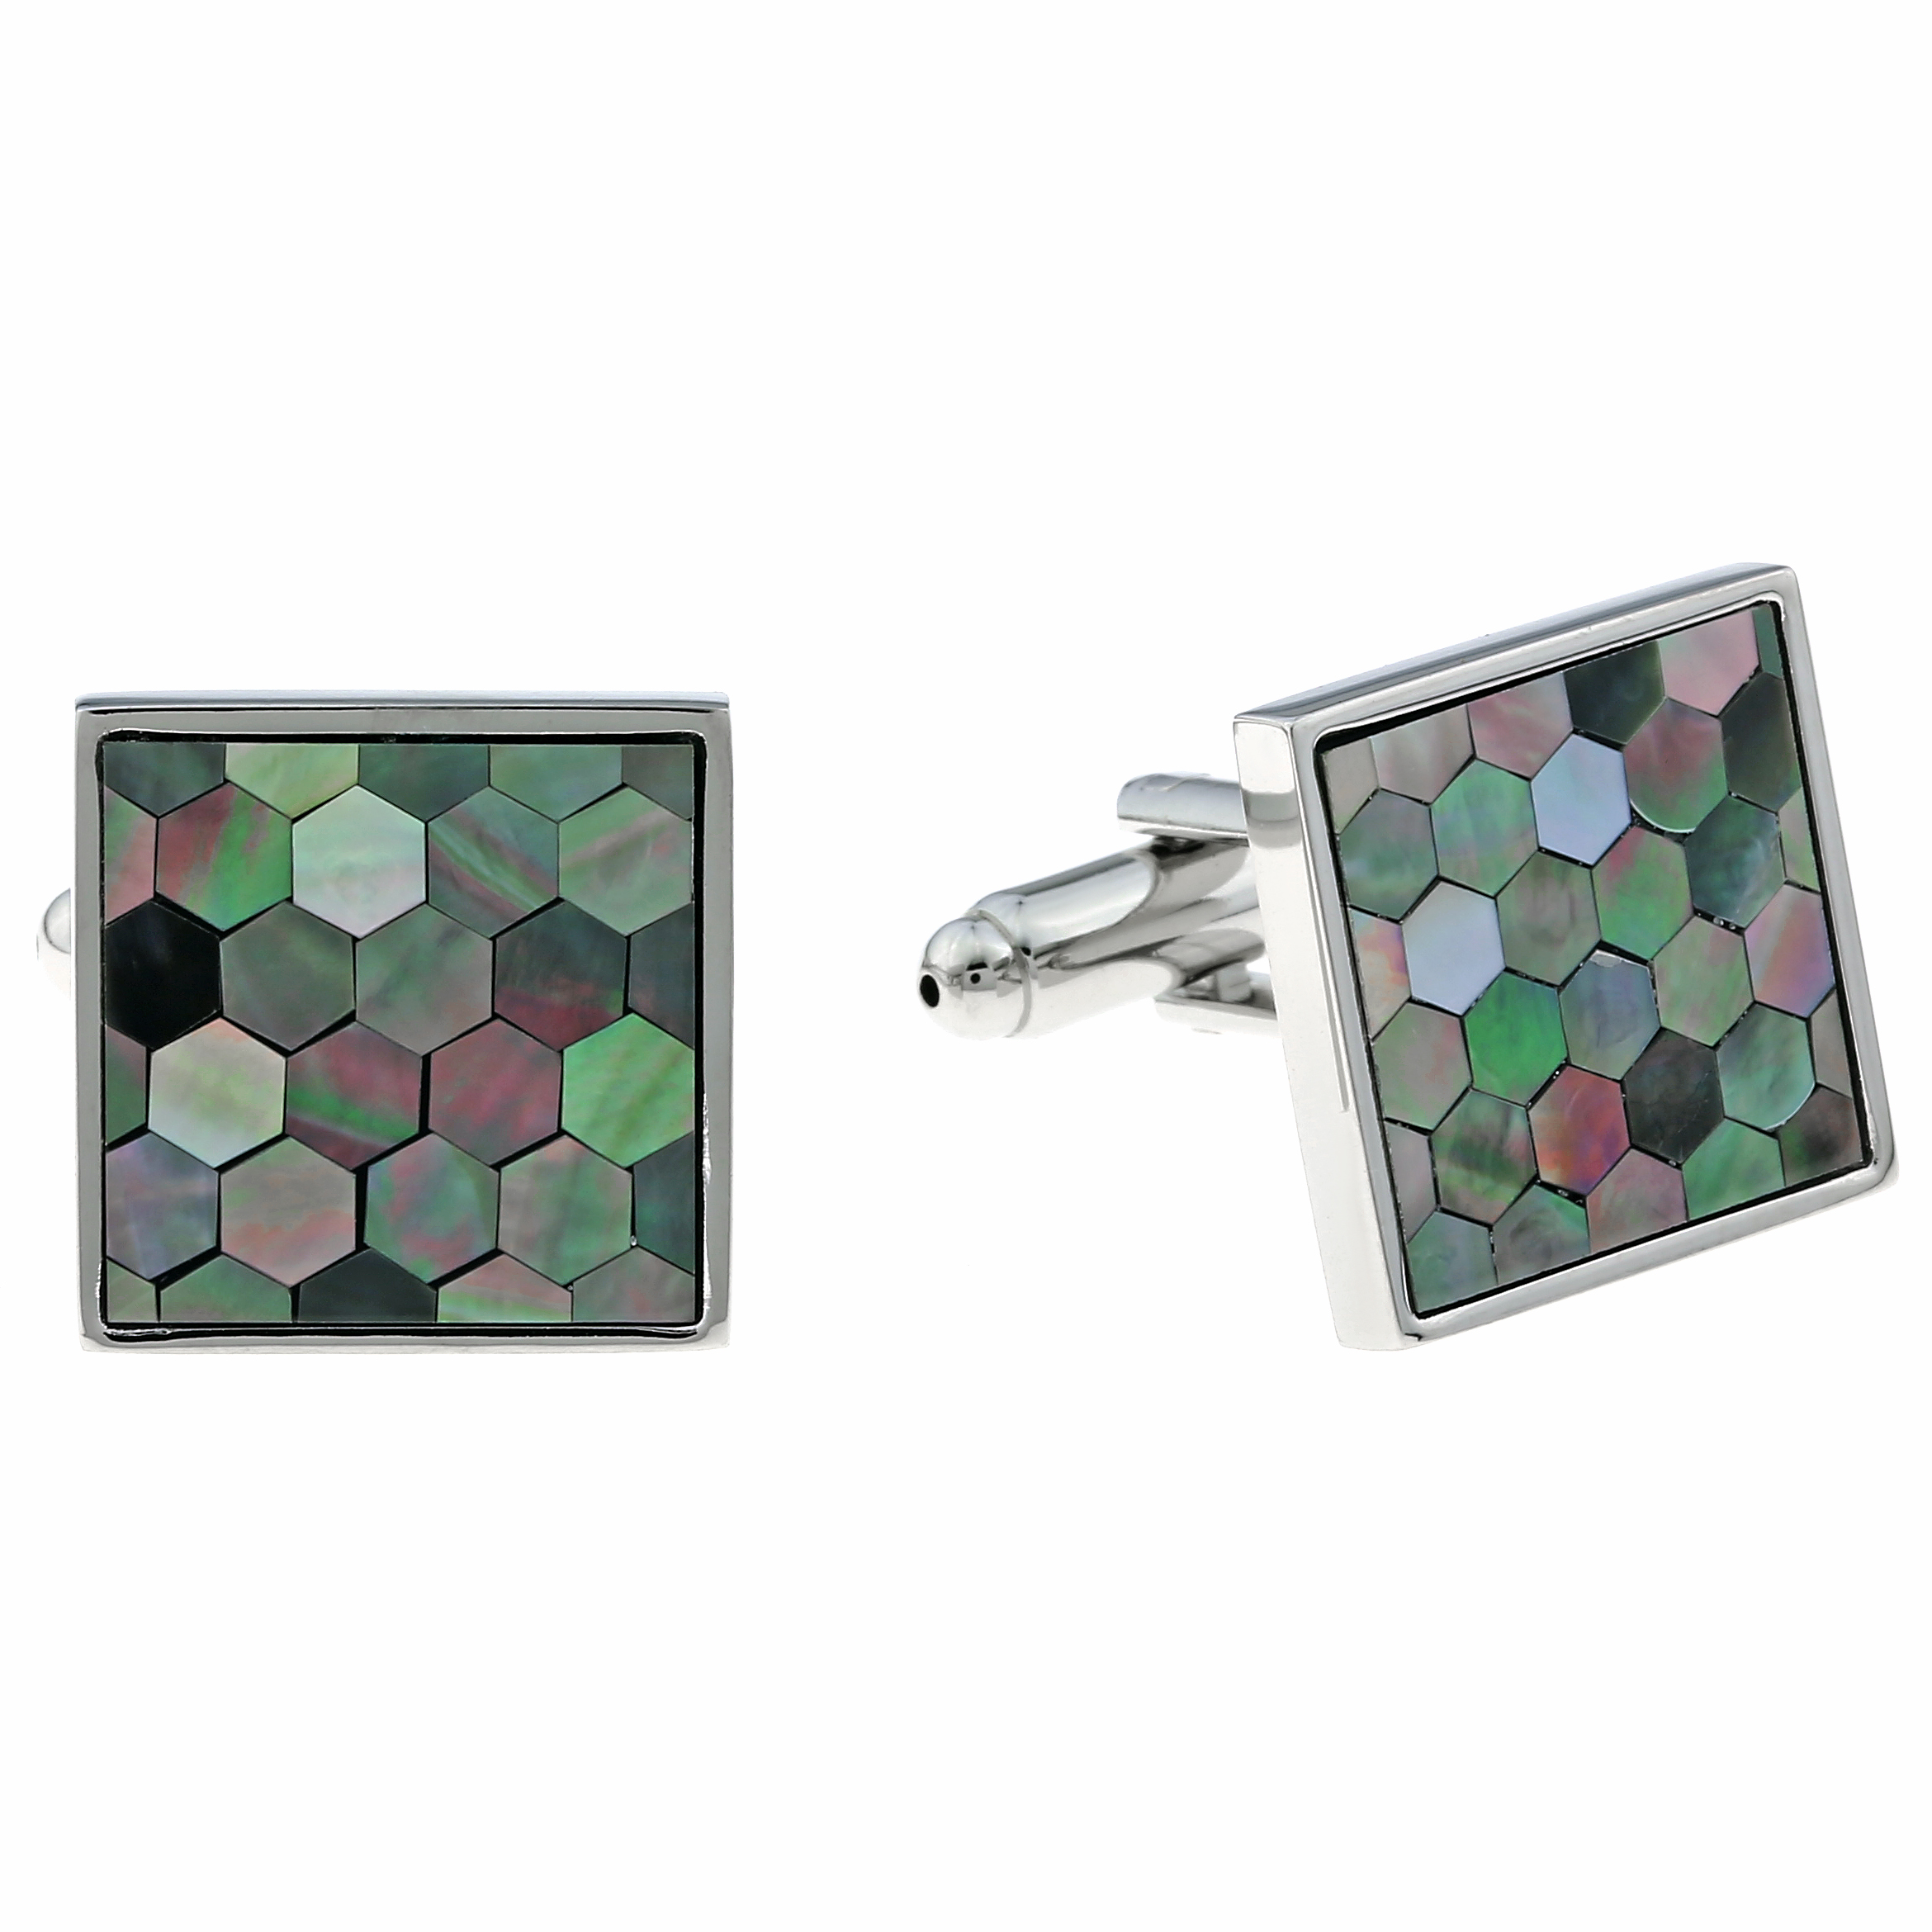 Stainless Steel Cuff Links with Multicolor Mozaic Design Shell